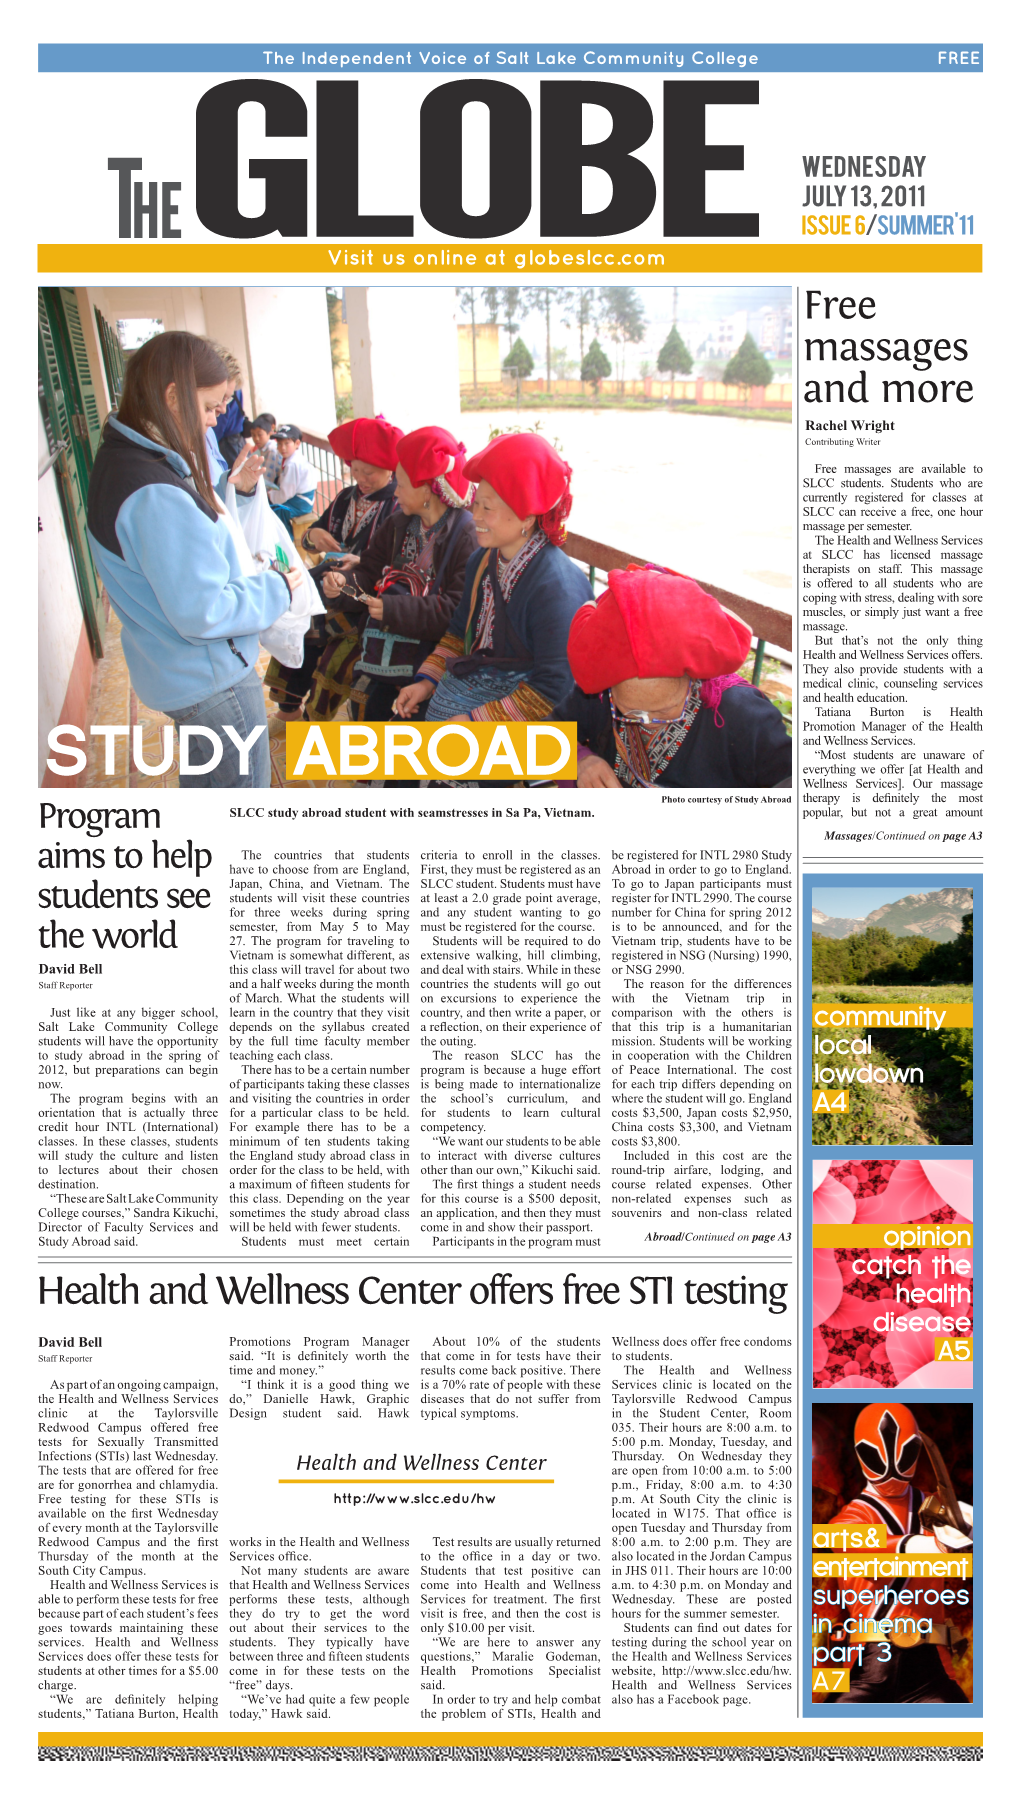 STUDY ABROAD Everything We Offer [At Health and Wellness Services]